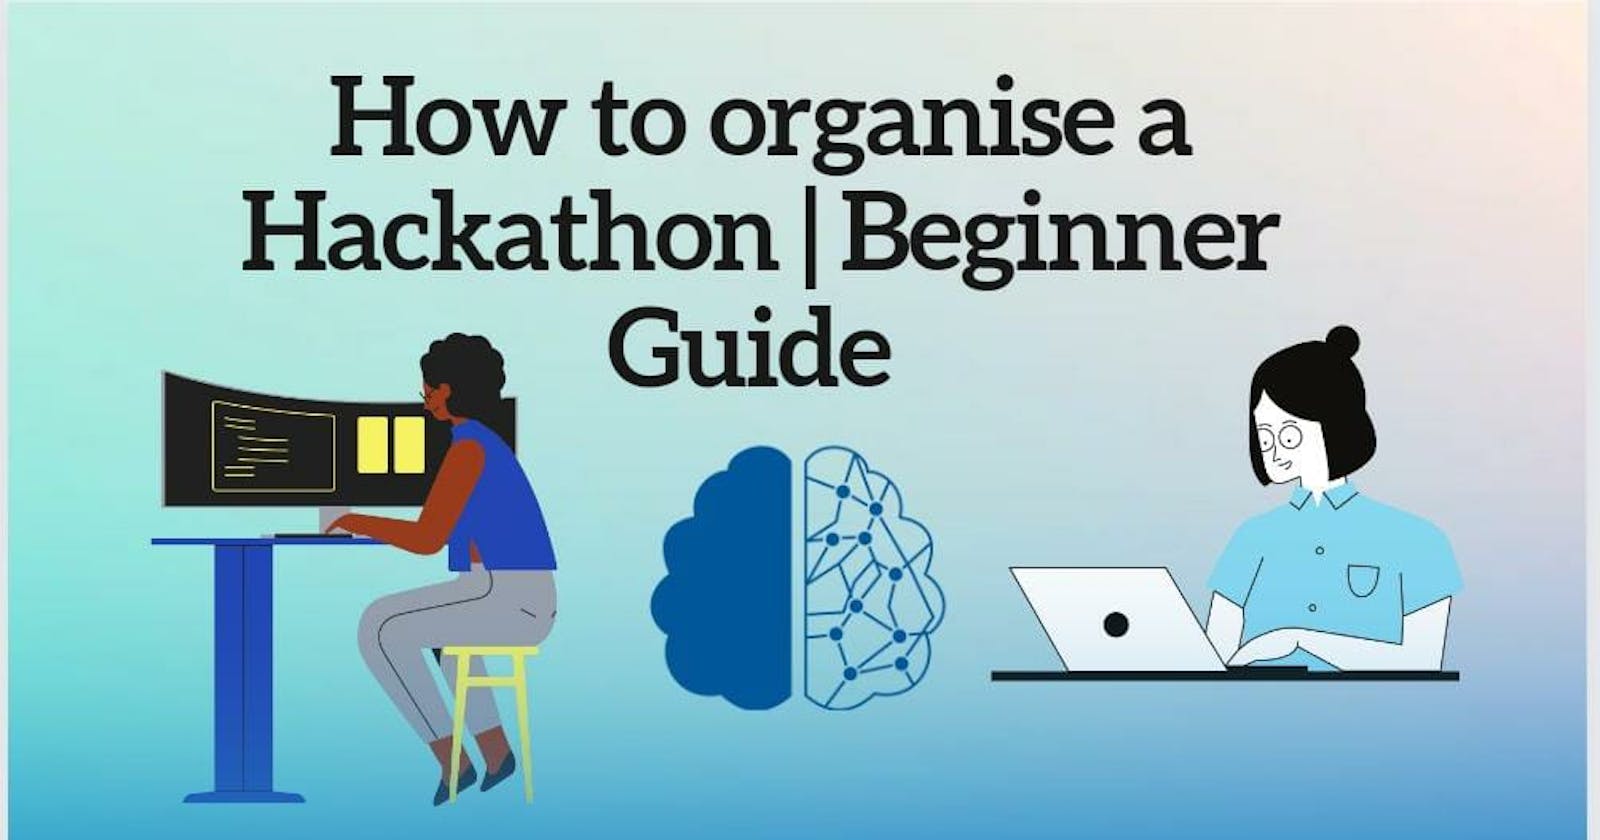 A Beginners Guide to organizing a successful Campus Hackathon